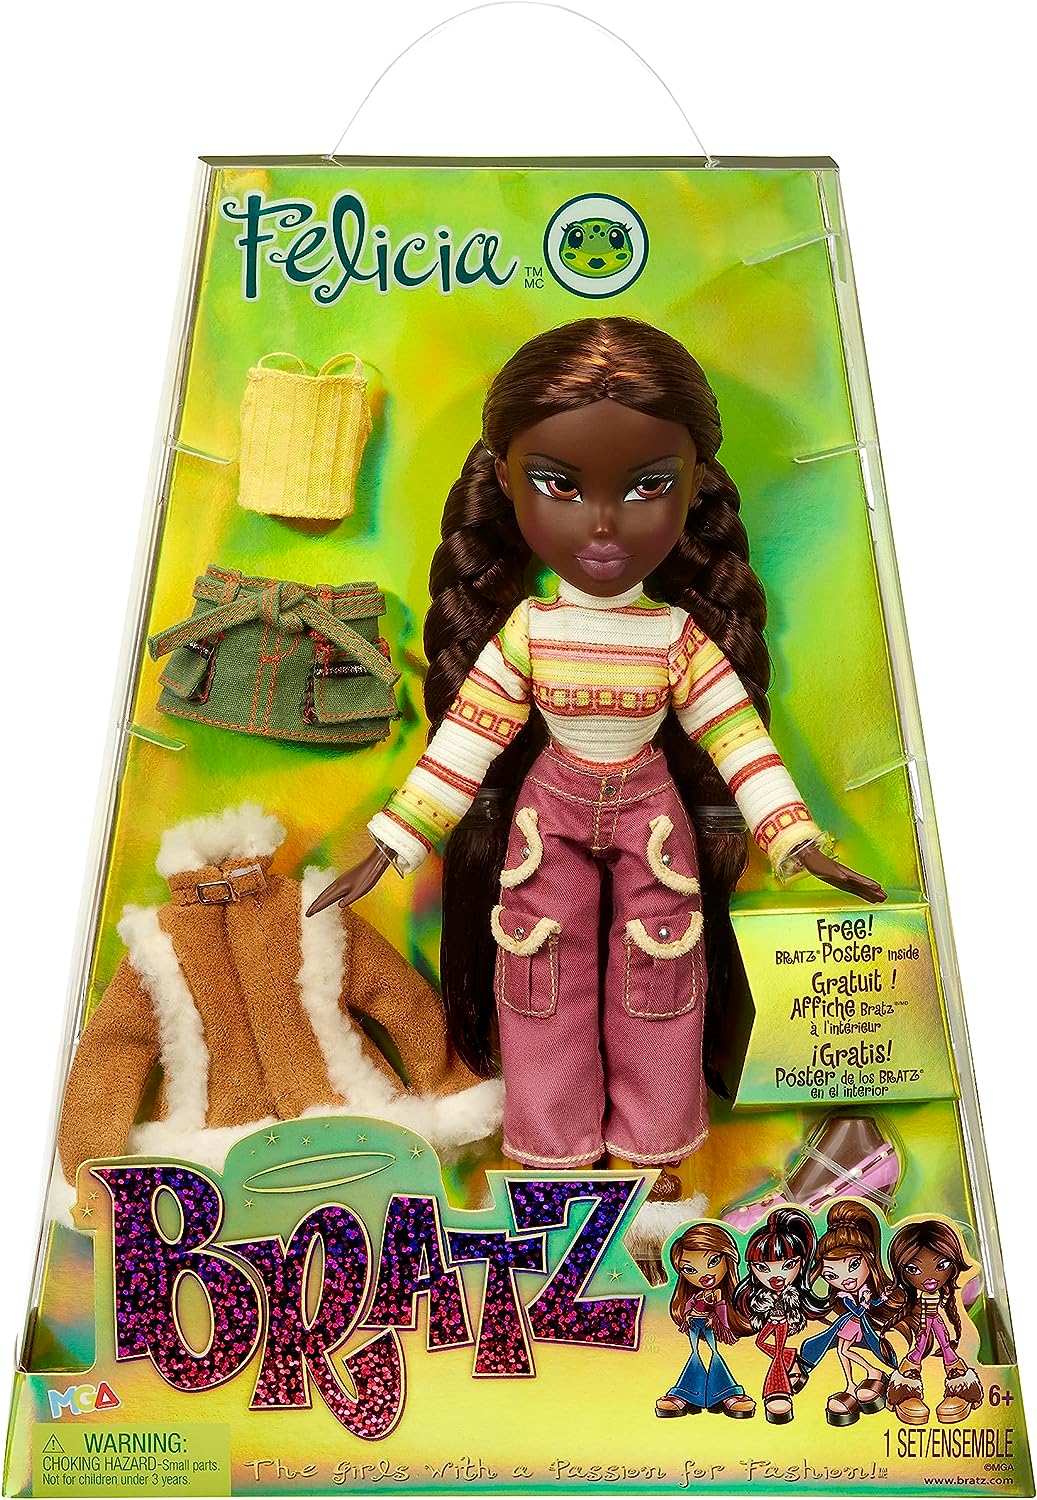 MGA's Miniverse Mini Bratz Limited Edition 2-Pack, Holiday Felicia and Tweevils Mini Figures in Display Packaging